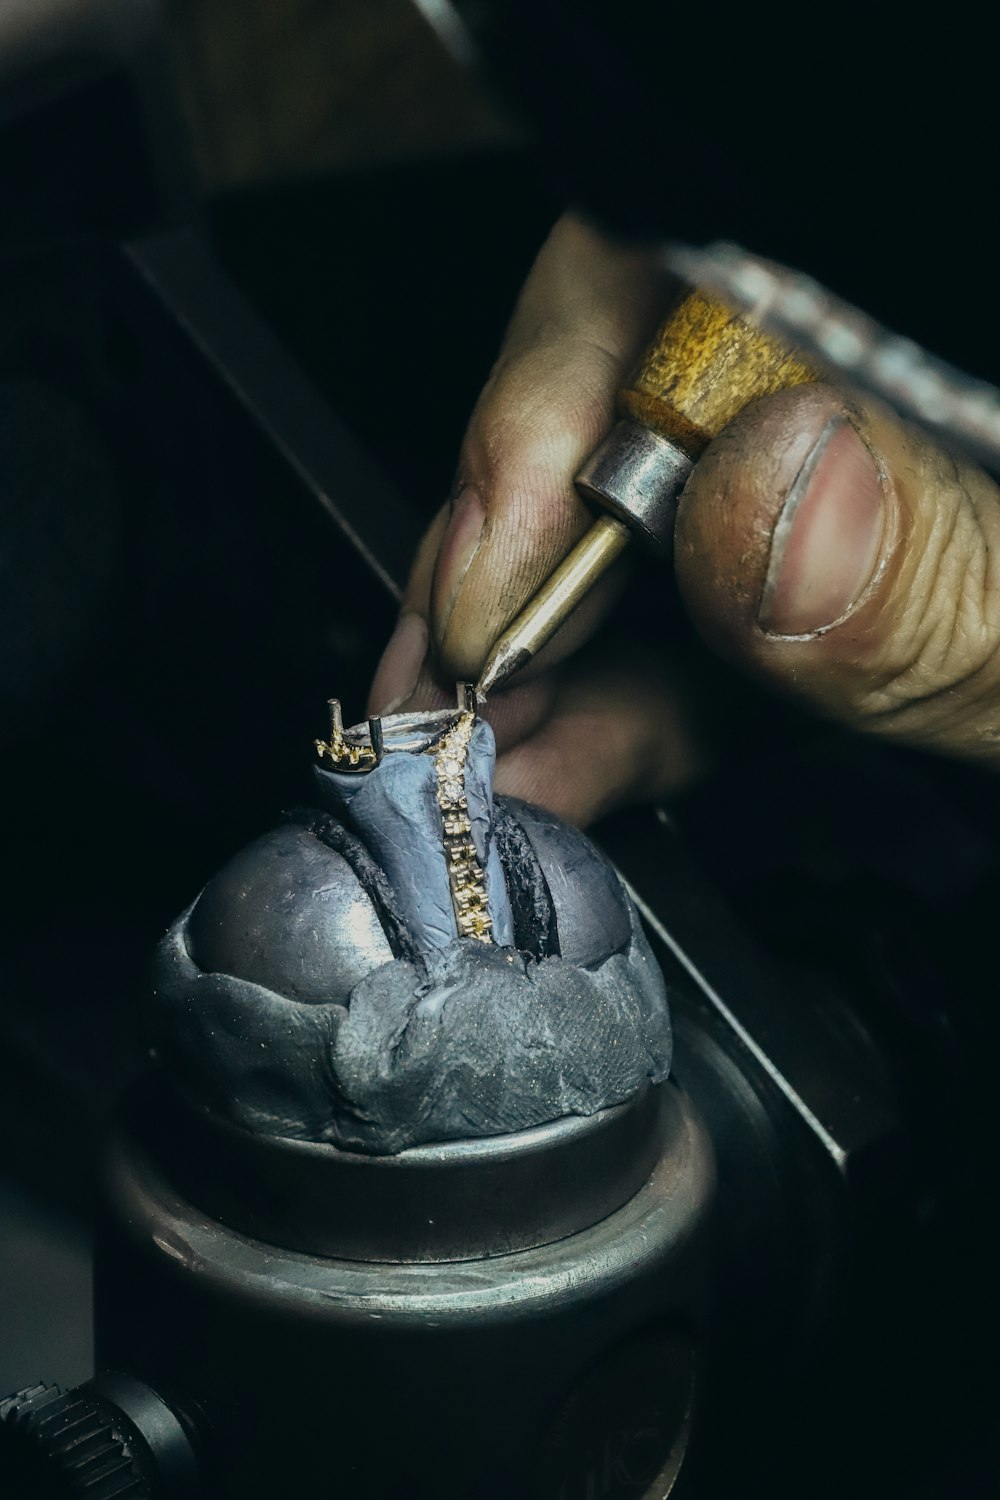 a person working on a shoe with a tool